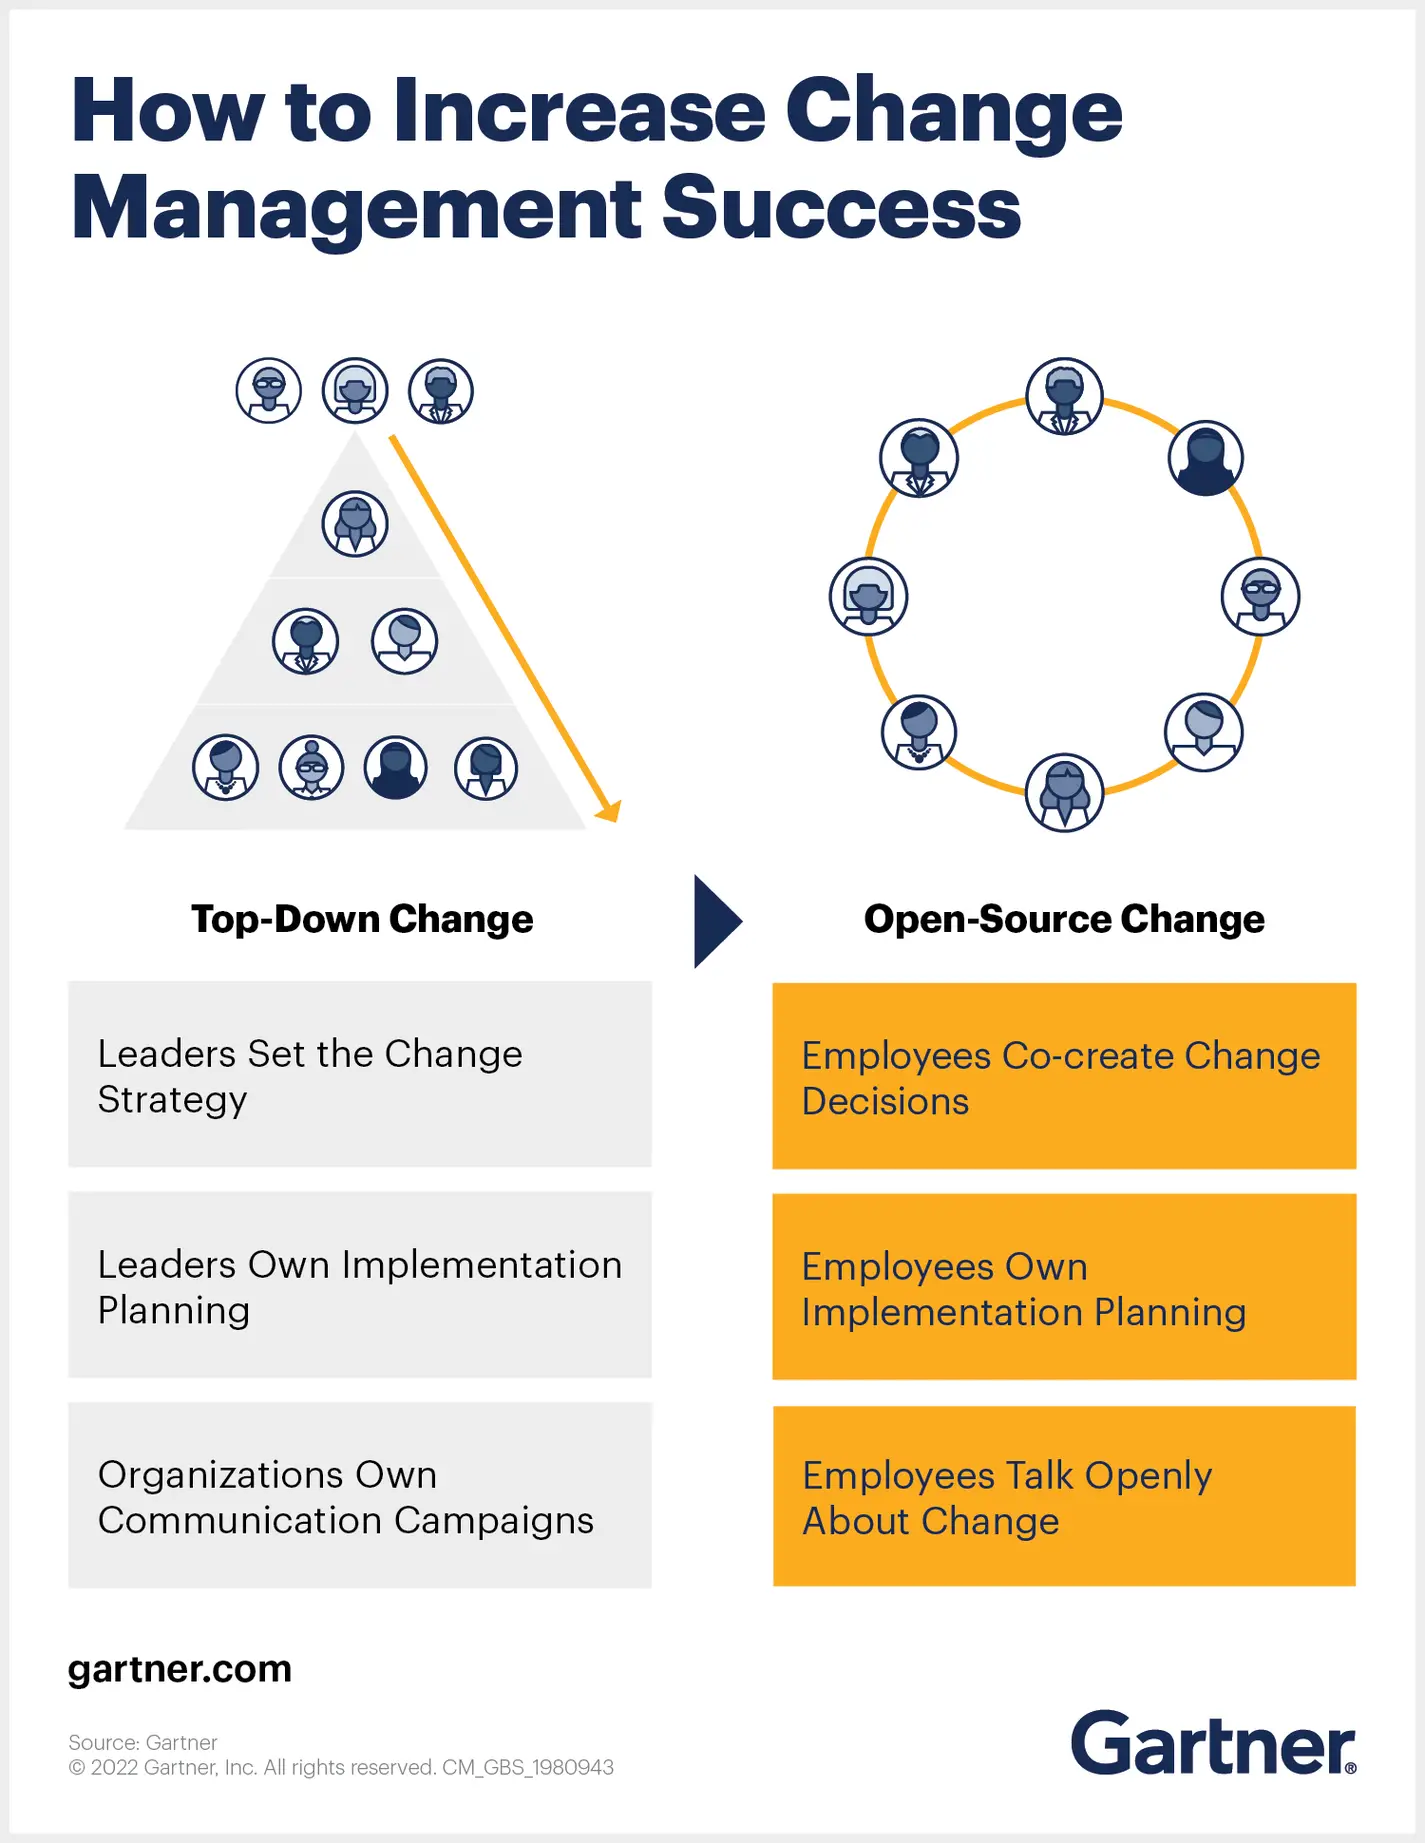 Tips for increasing the success for change management